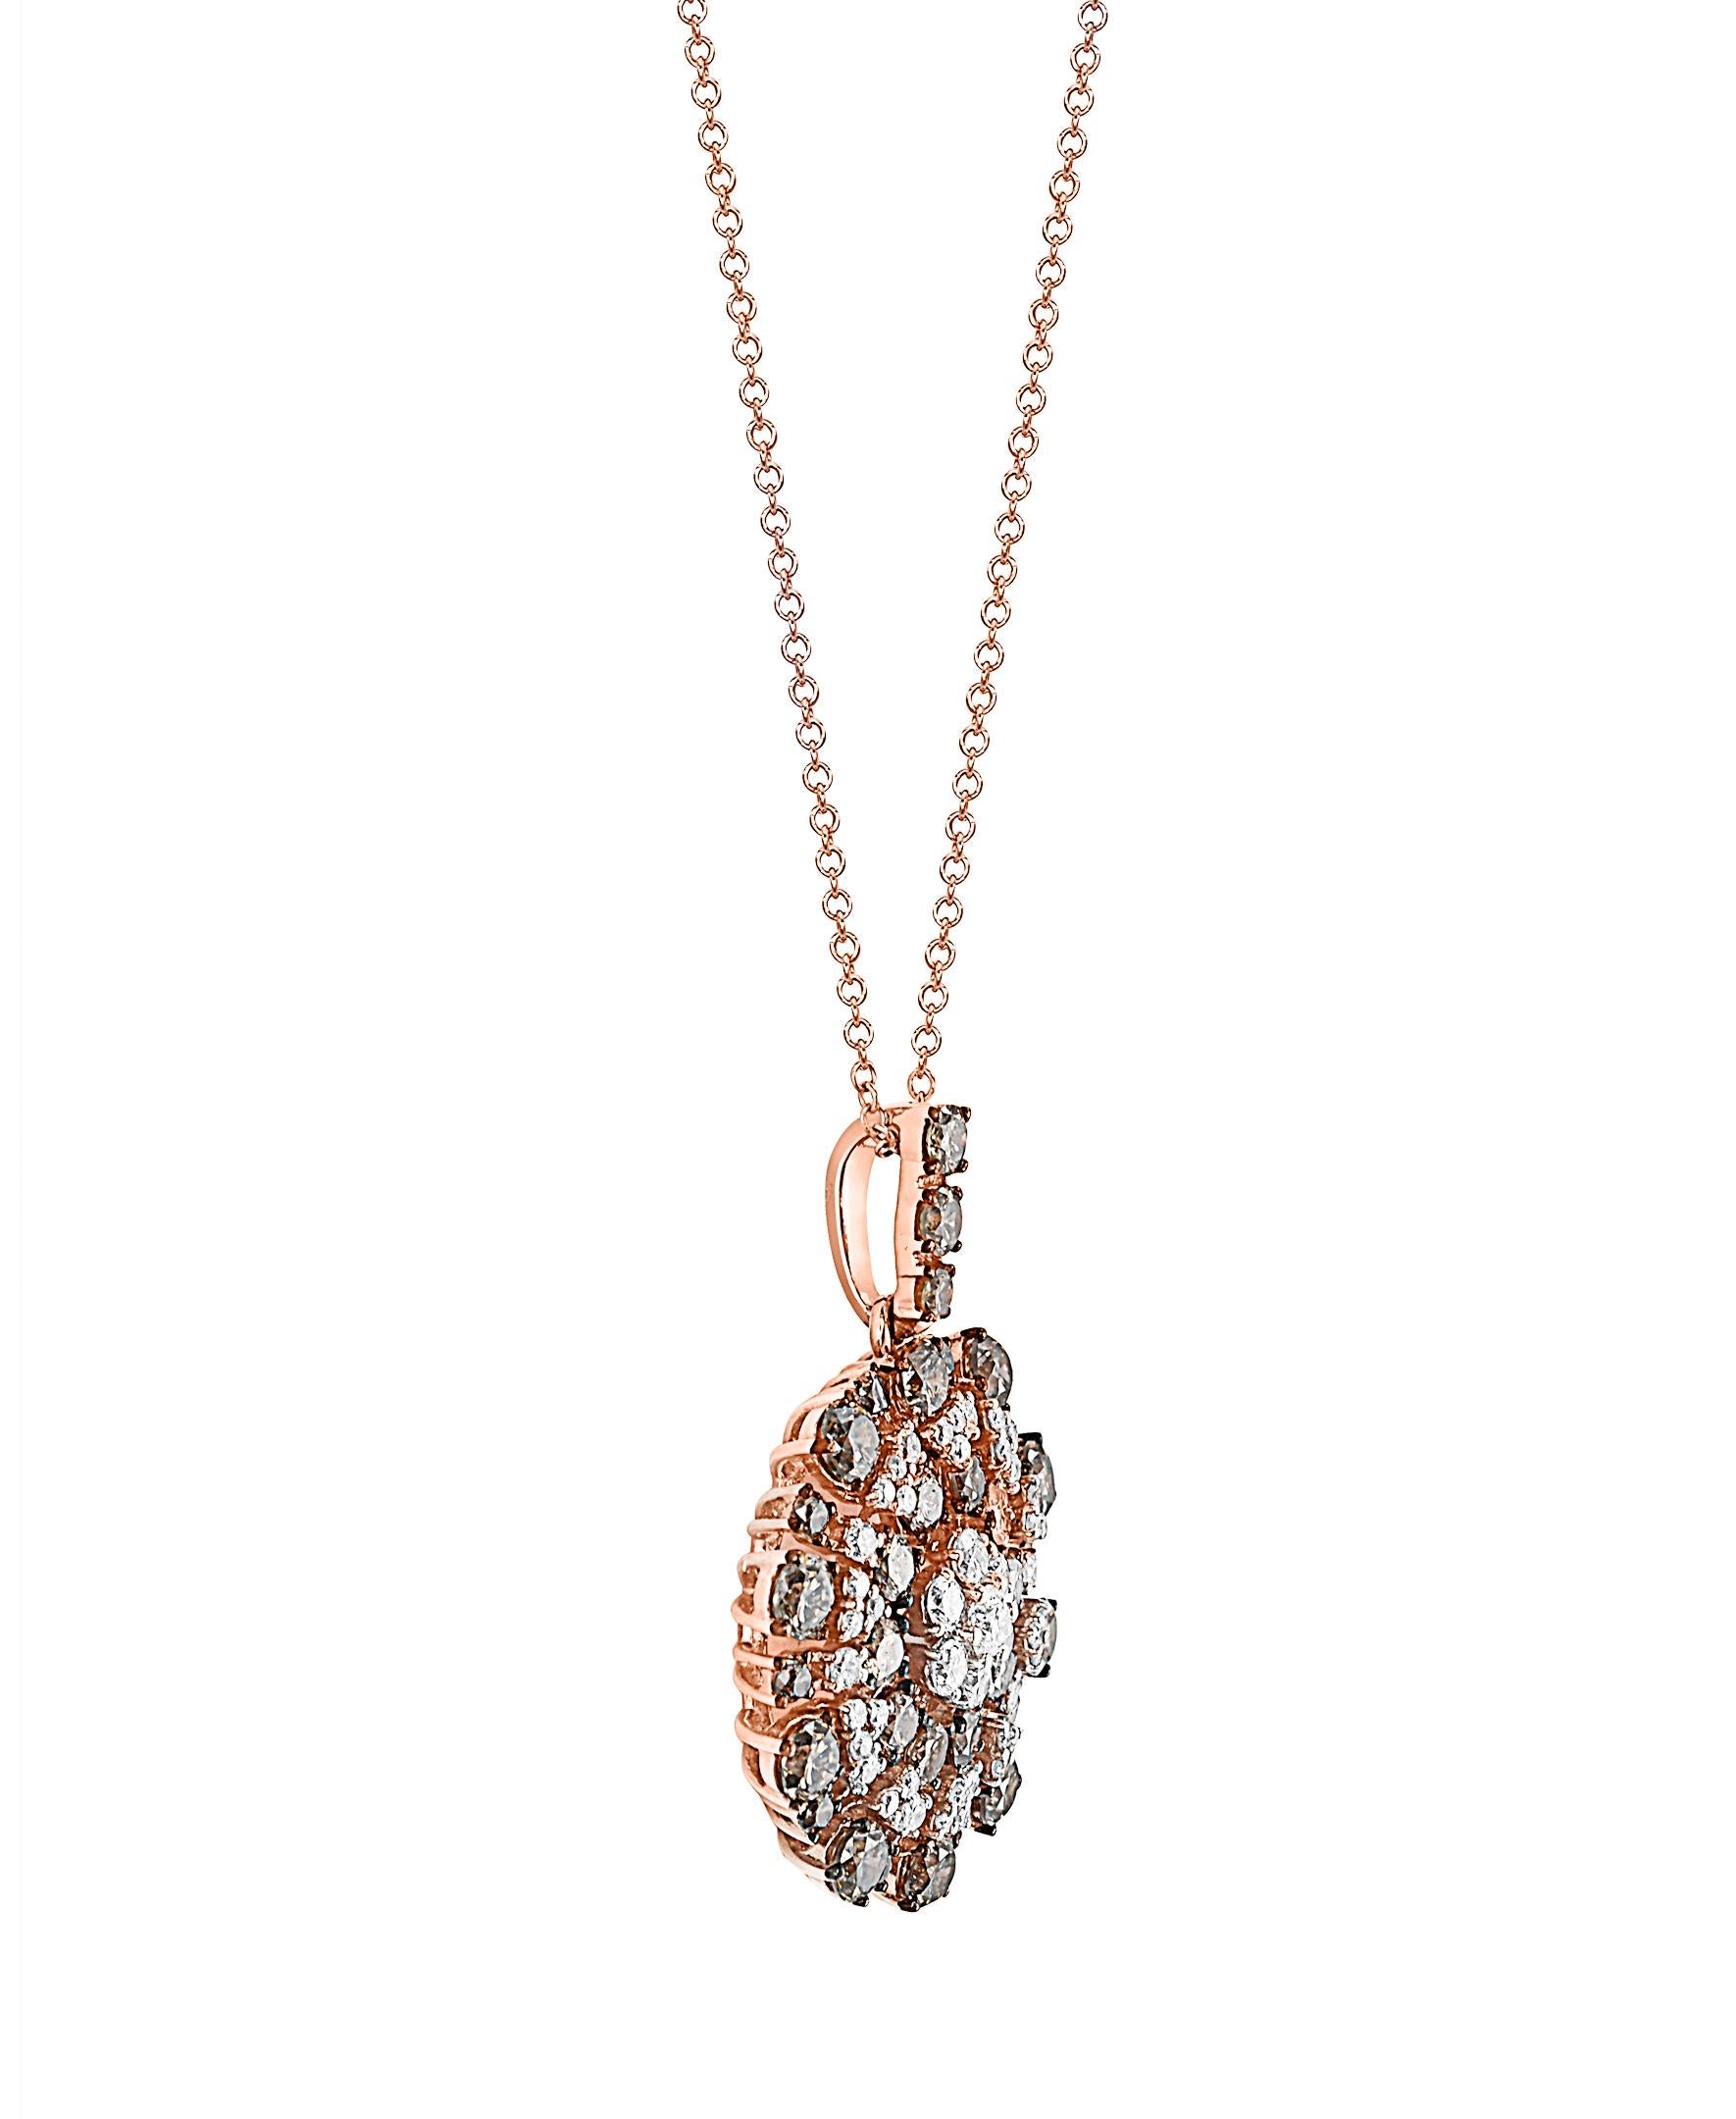 This Effy design pendant is set in 14K Rose gold. 
The design has a starburst of white and brown round diamonds, with a total weight of 1.81 ct.

The pendant has an 18